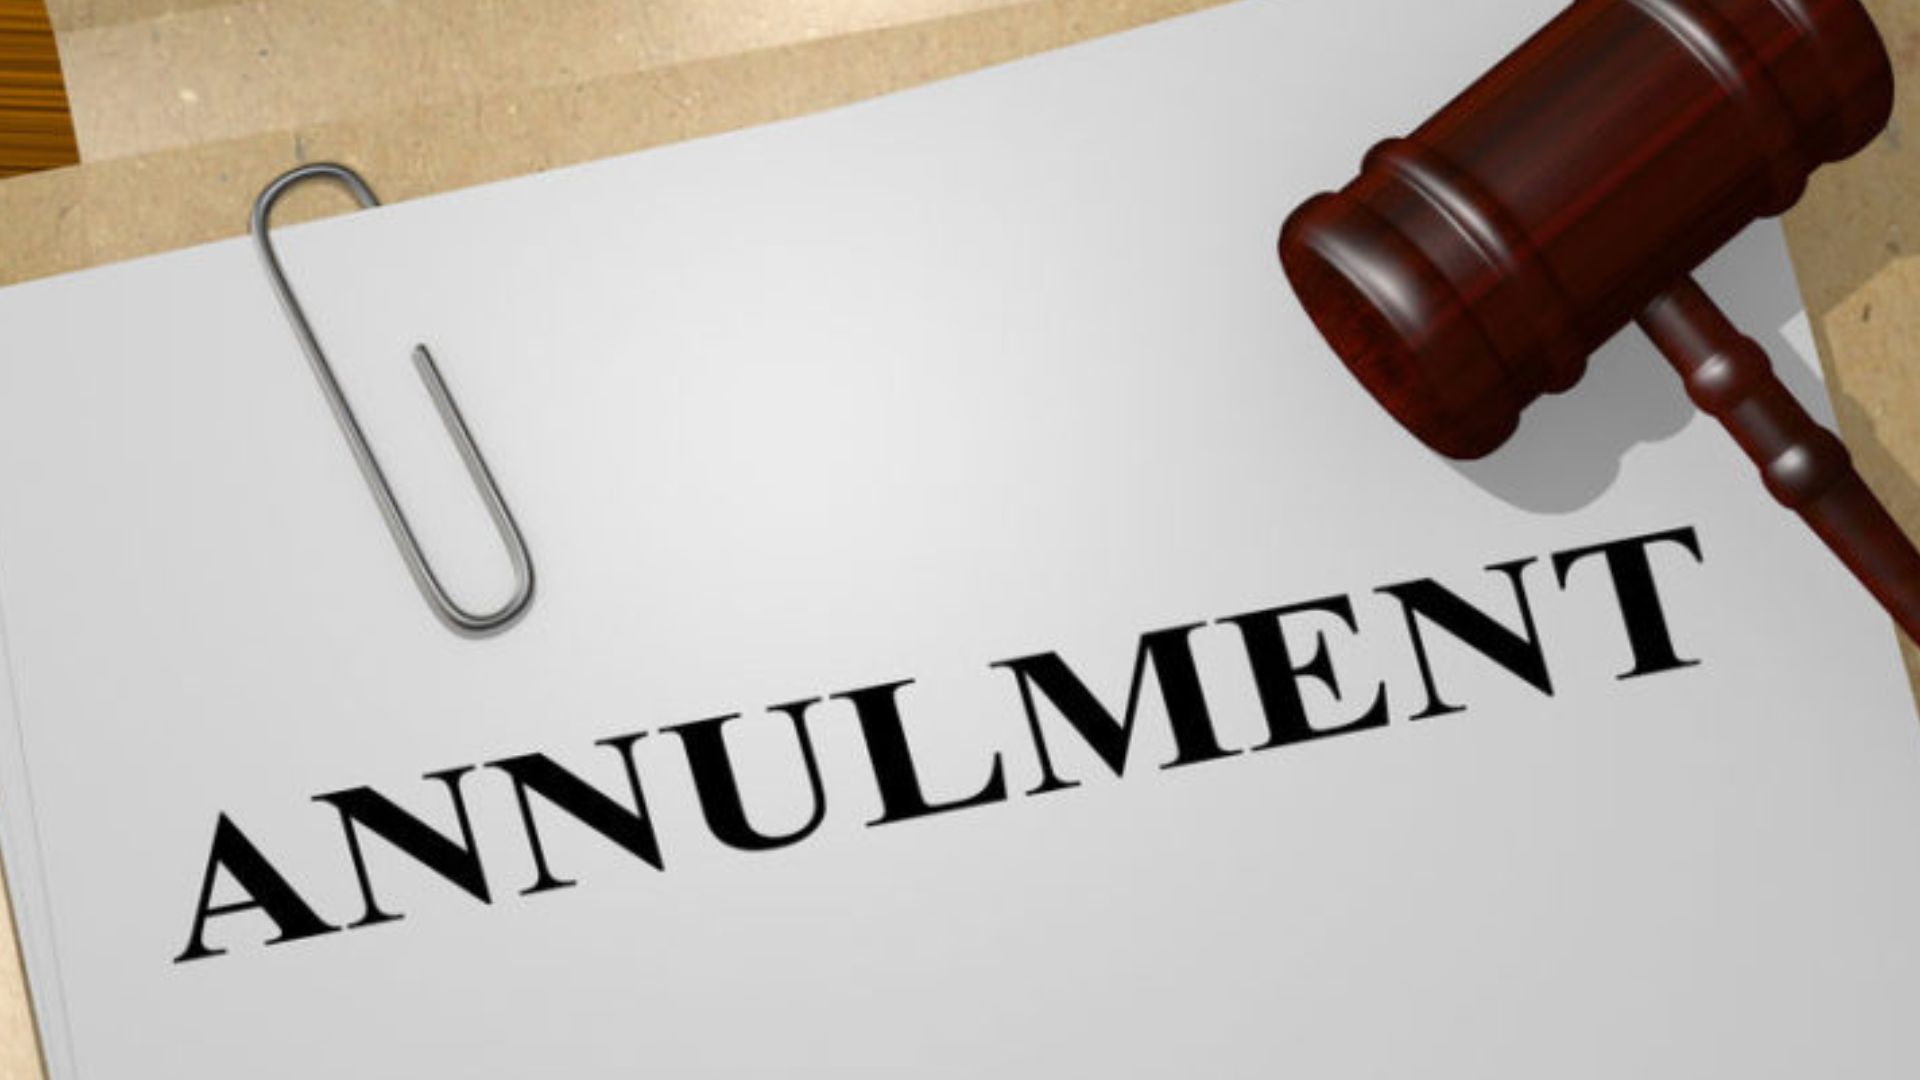 A gavel on top of an annulment document